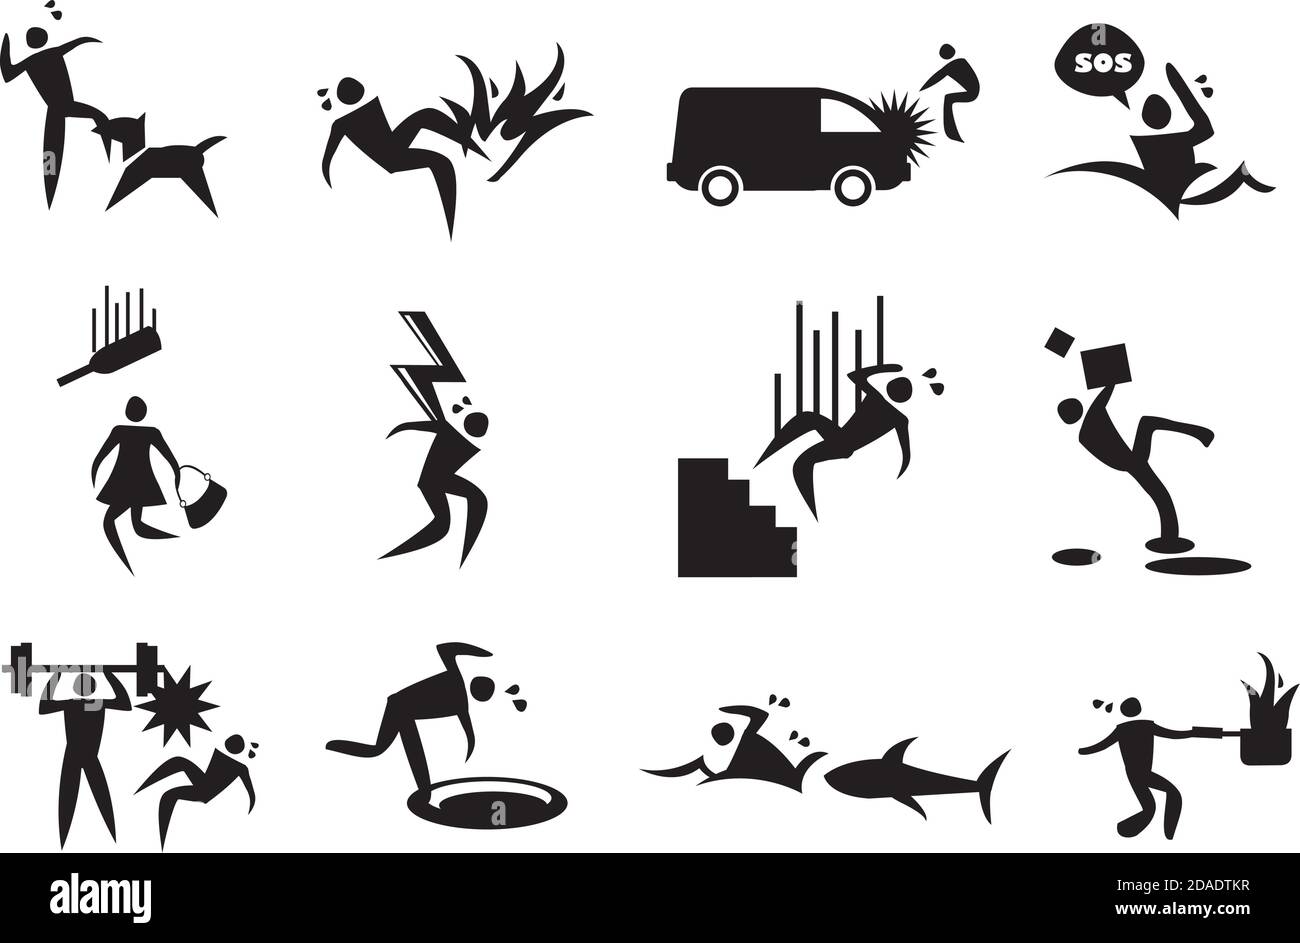 Vector illustration of various accidents. Conceptual icon set. Stock Vector